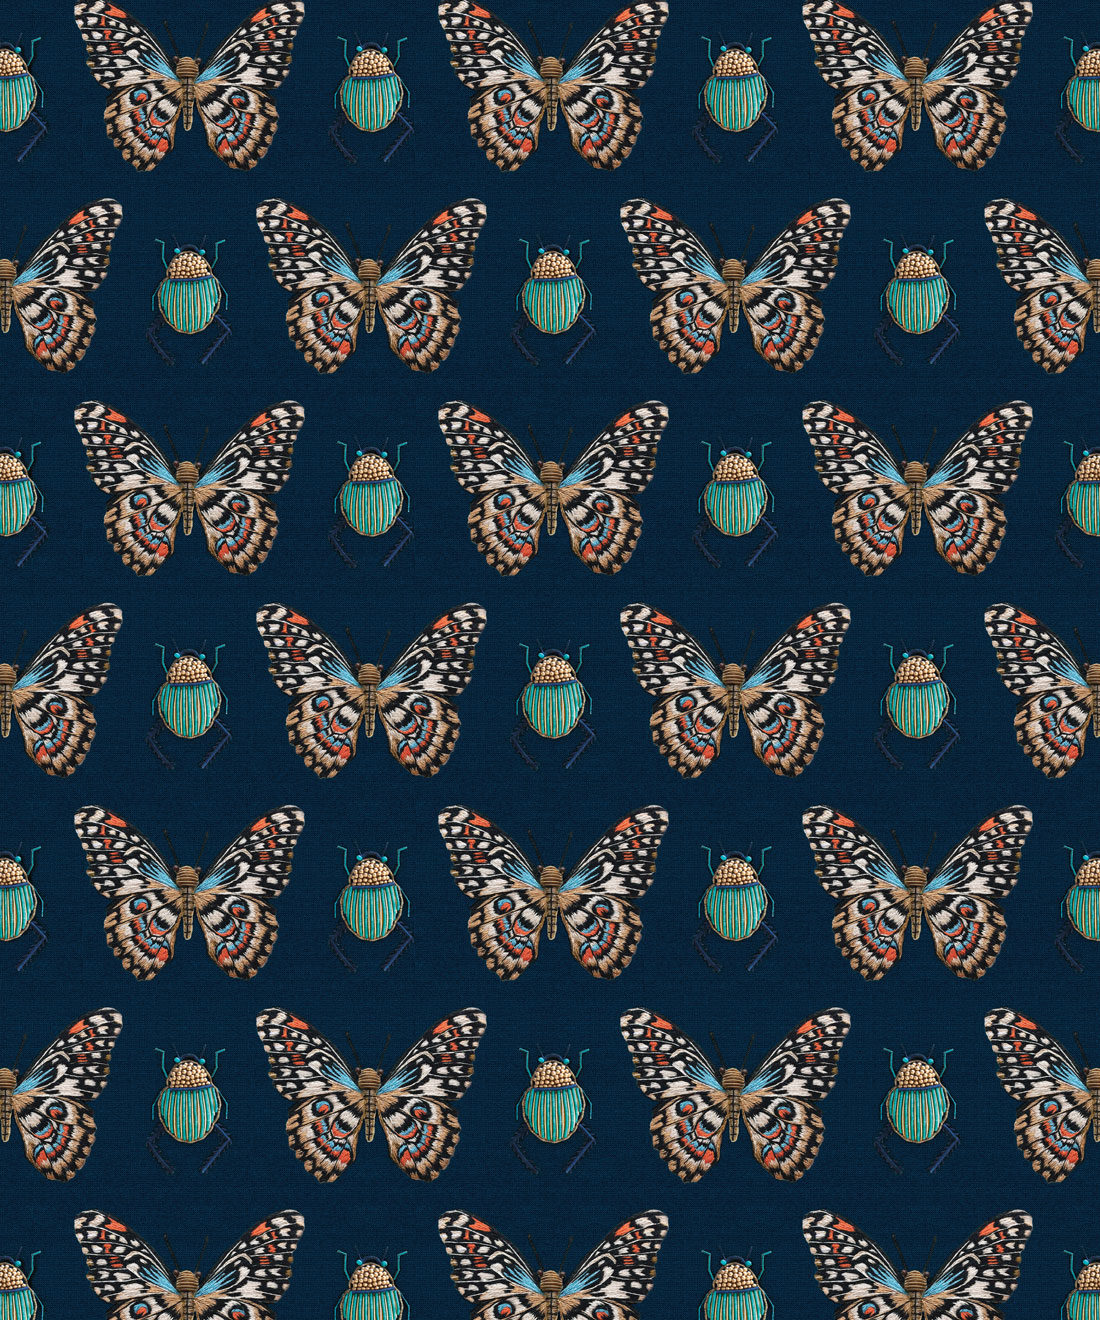 Beetle & Butterfly Wallpaper • Textured Handcrafted Style • Milton ...